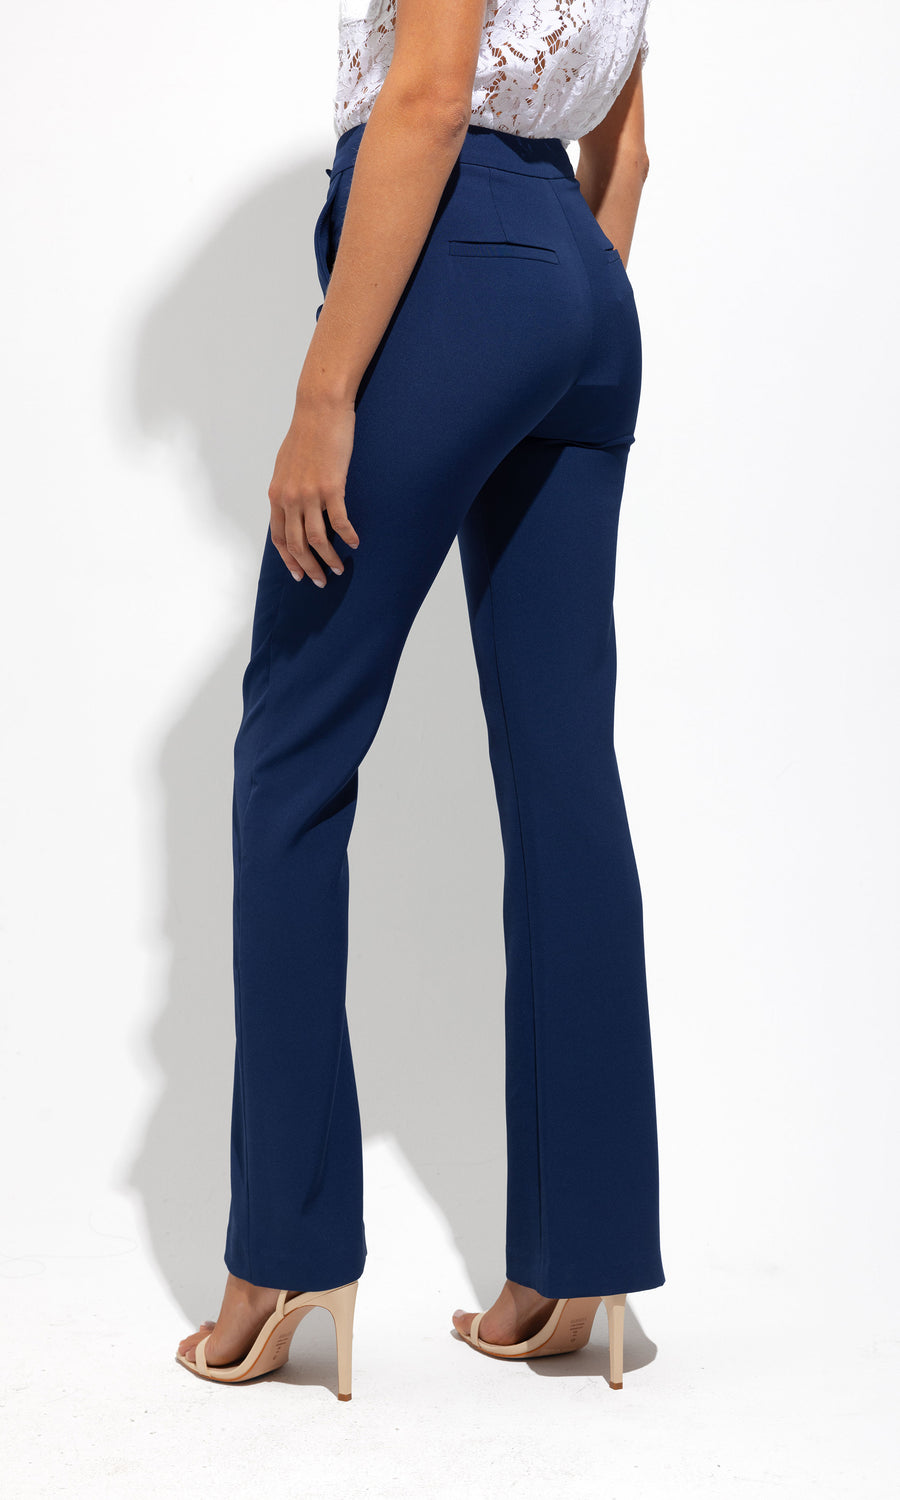 Lucca Crepe Pants - Navy